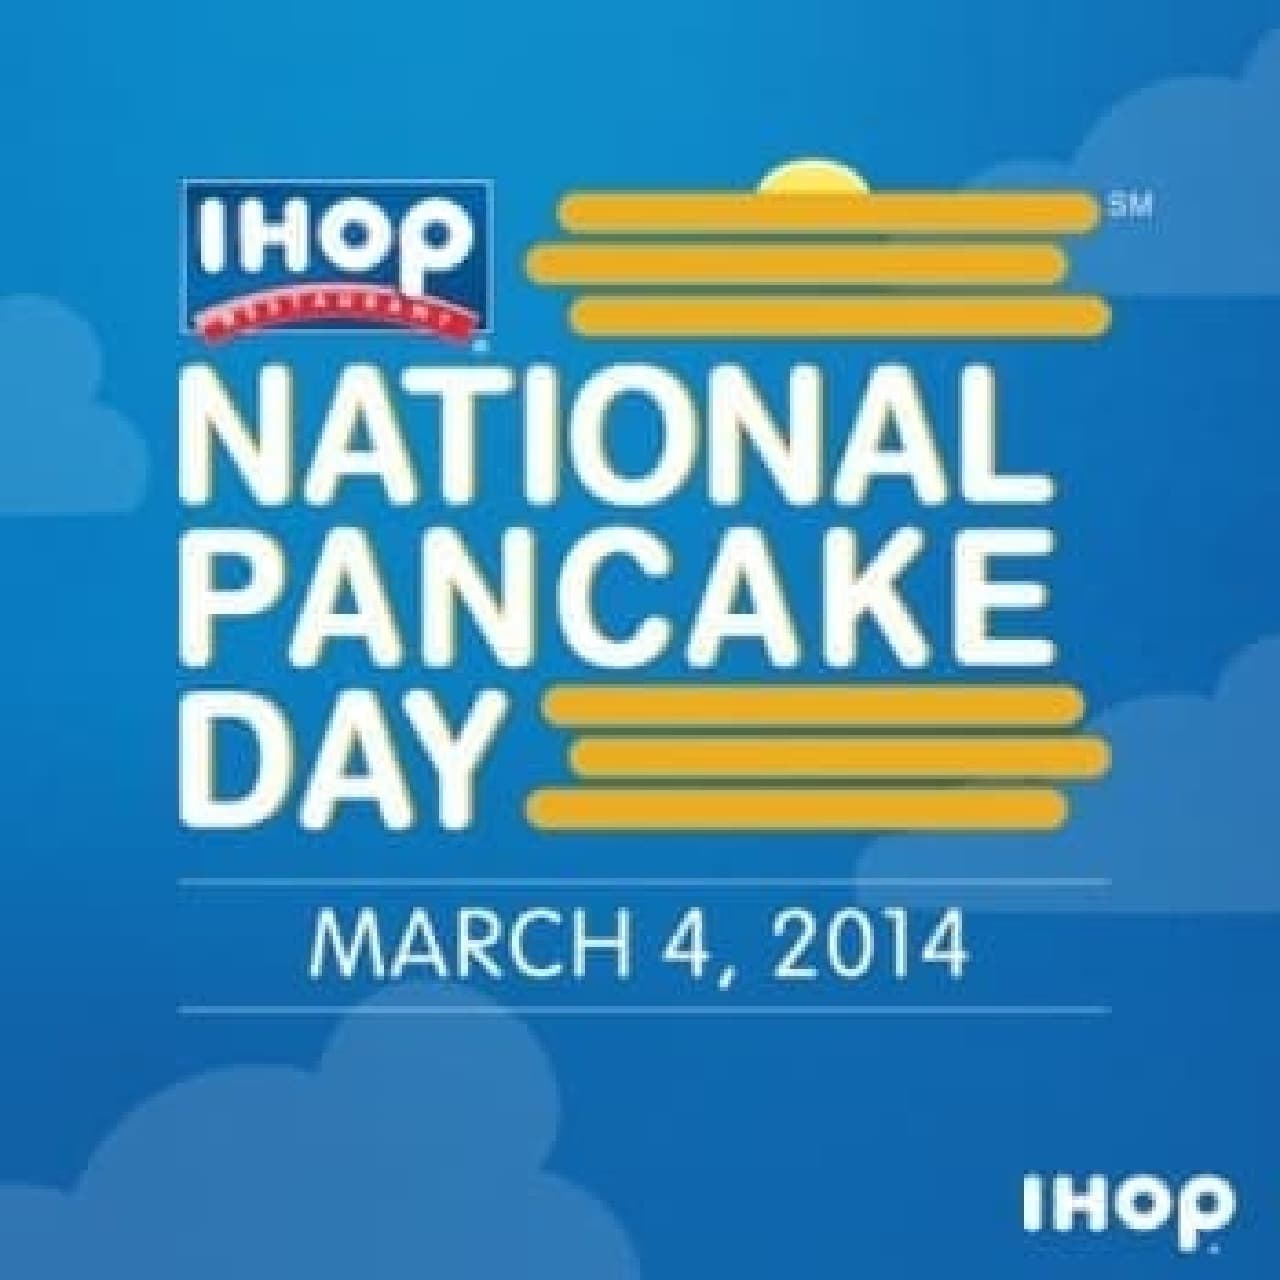 You can eat pancakes for free !?